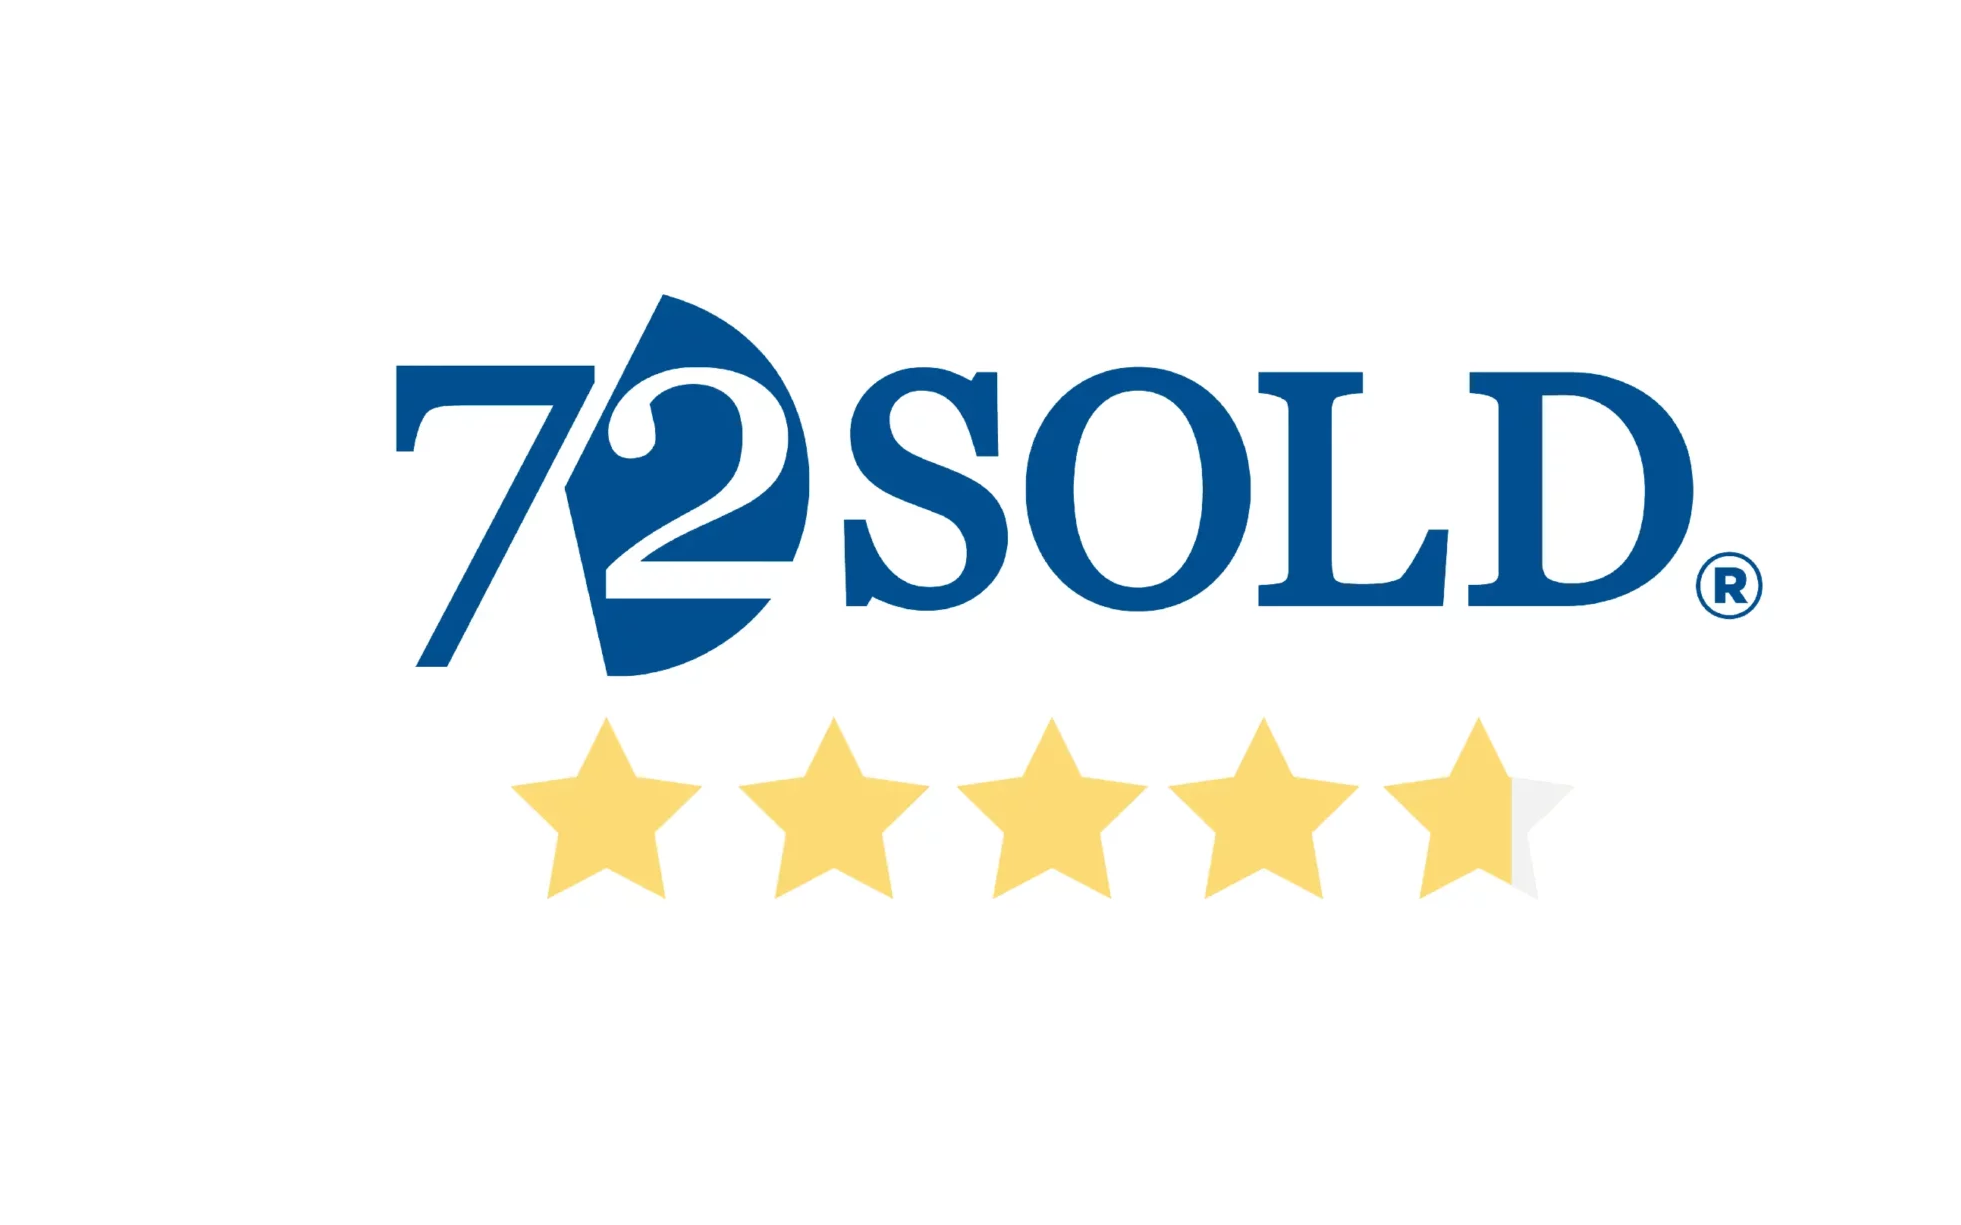 72-SOLD-Reviews